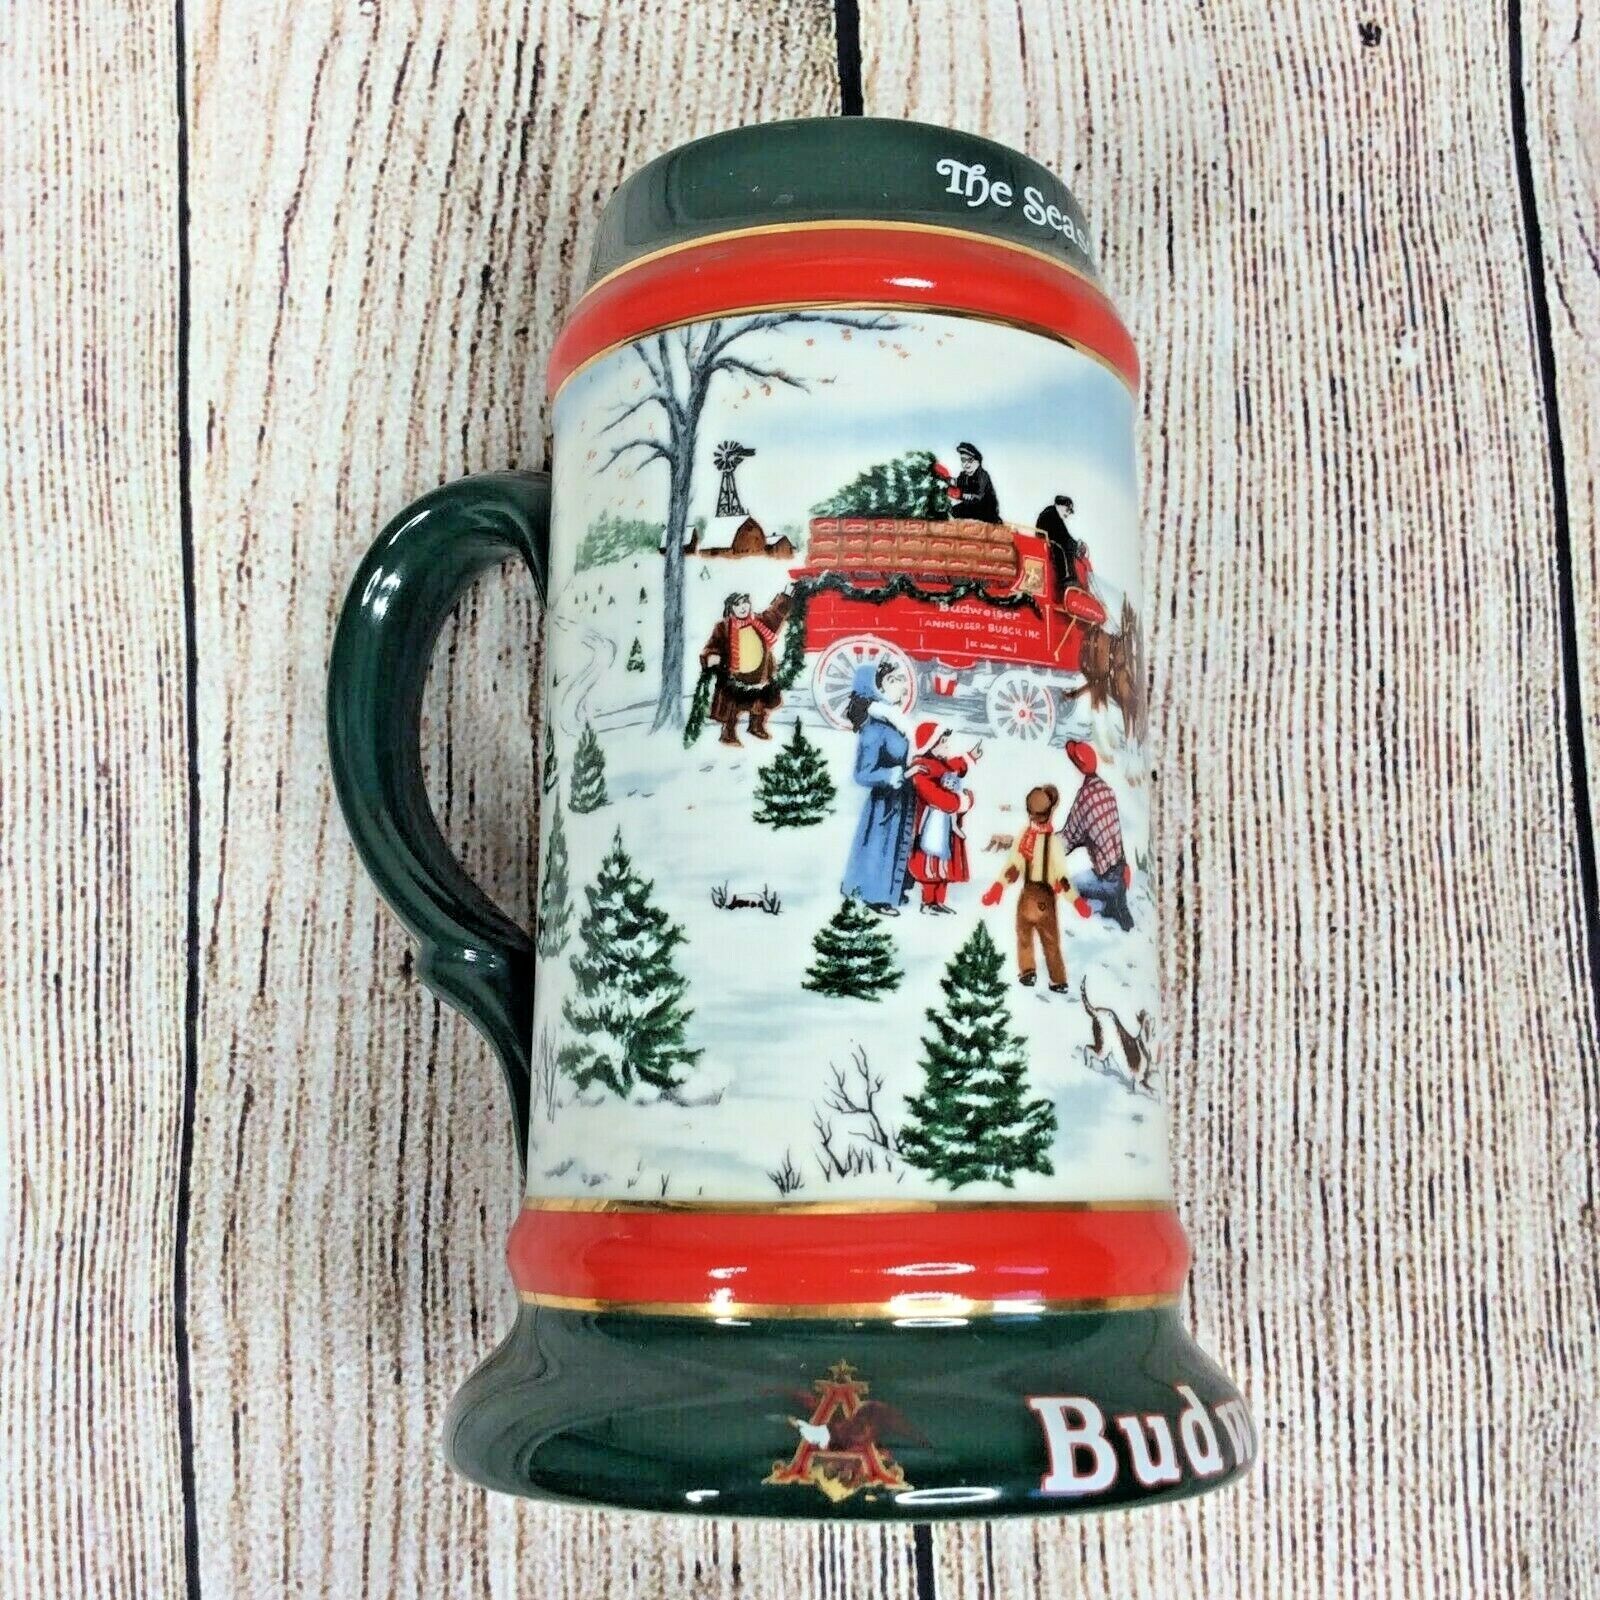 1991 Anheuser Busch Budweiser Clydesdale Holiday Stein The Seasons Best